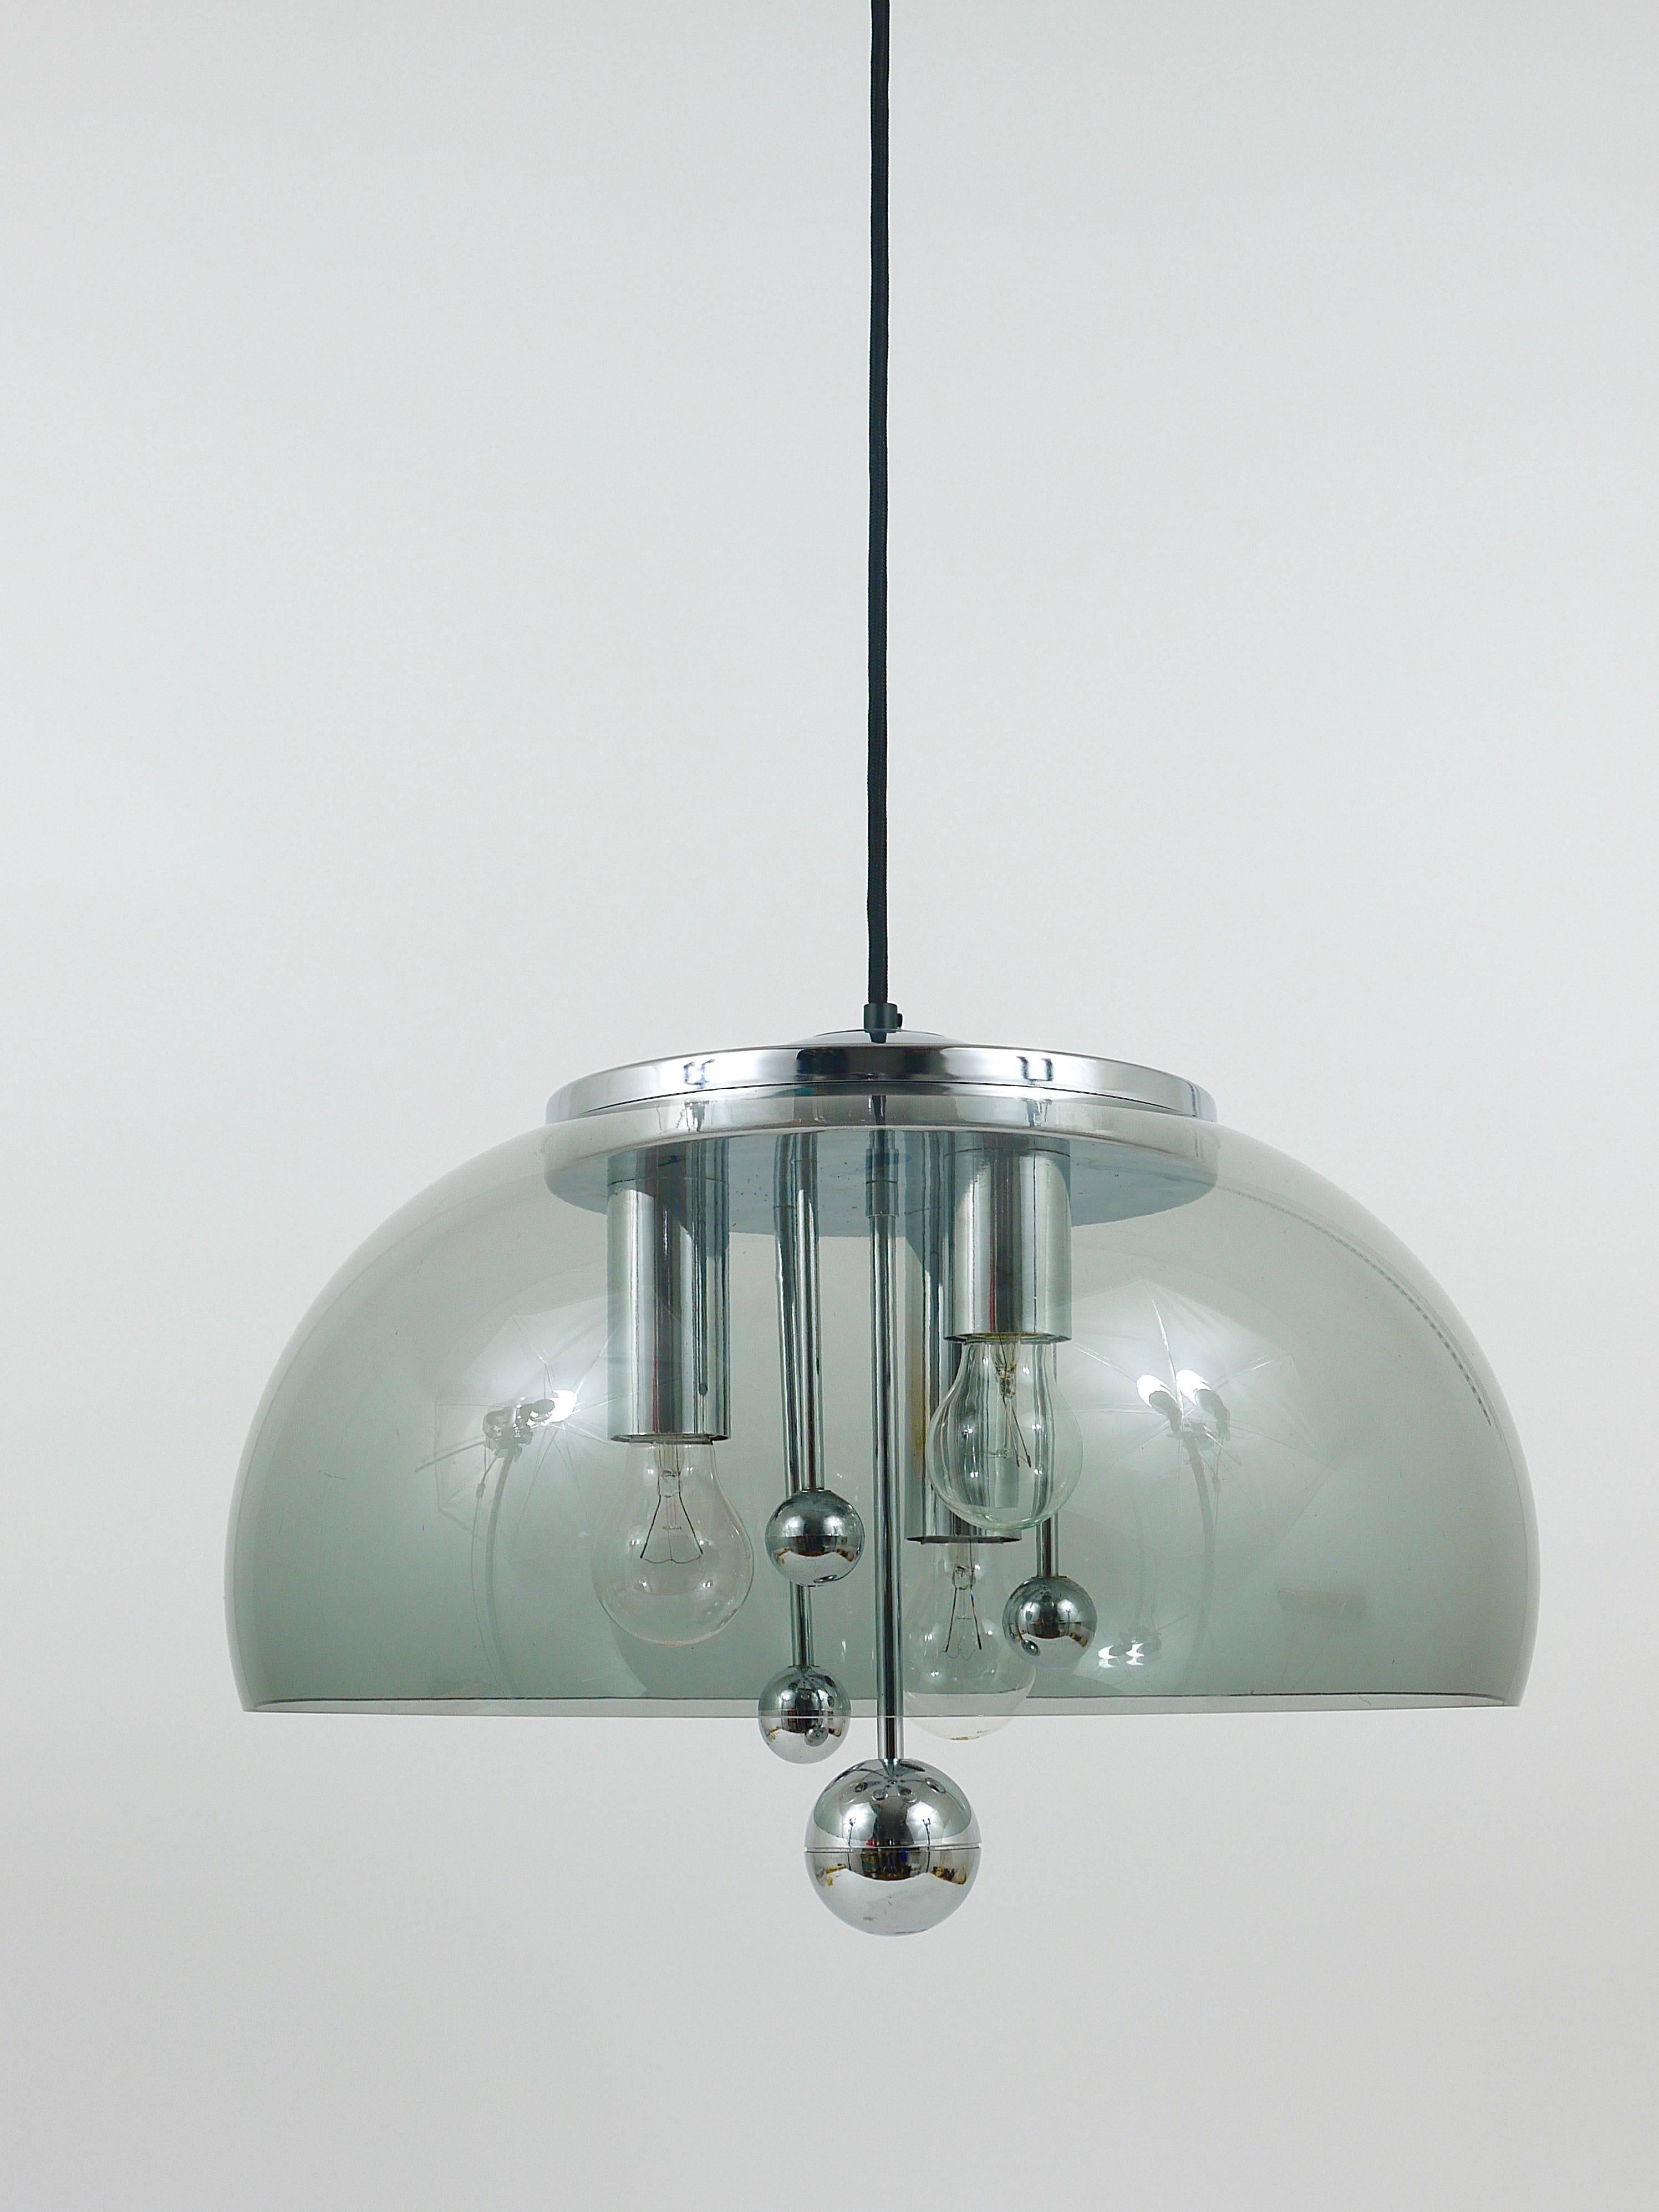 Midcentury Space Age Globe Pendant Lamp with Chromed Spheres, Germany, 1970s For Sale 10